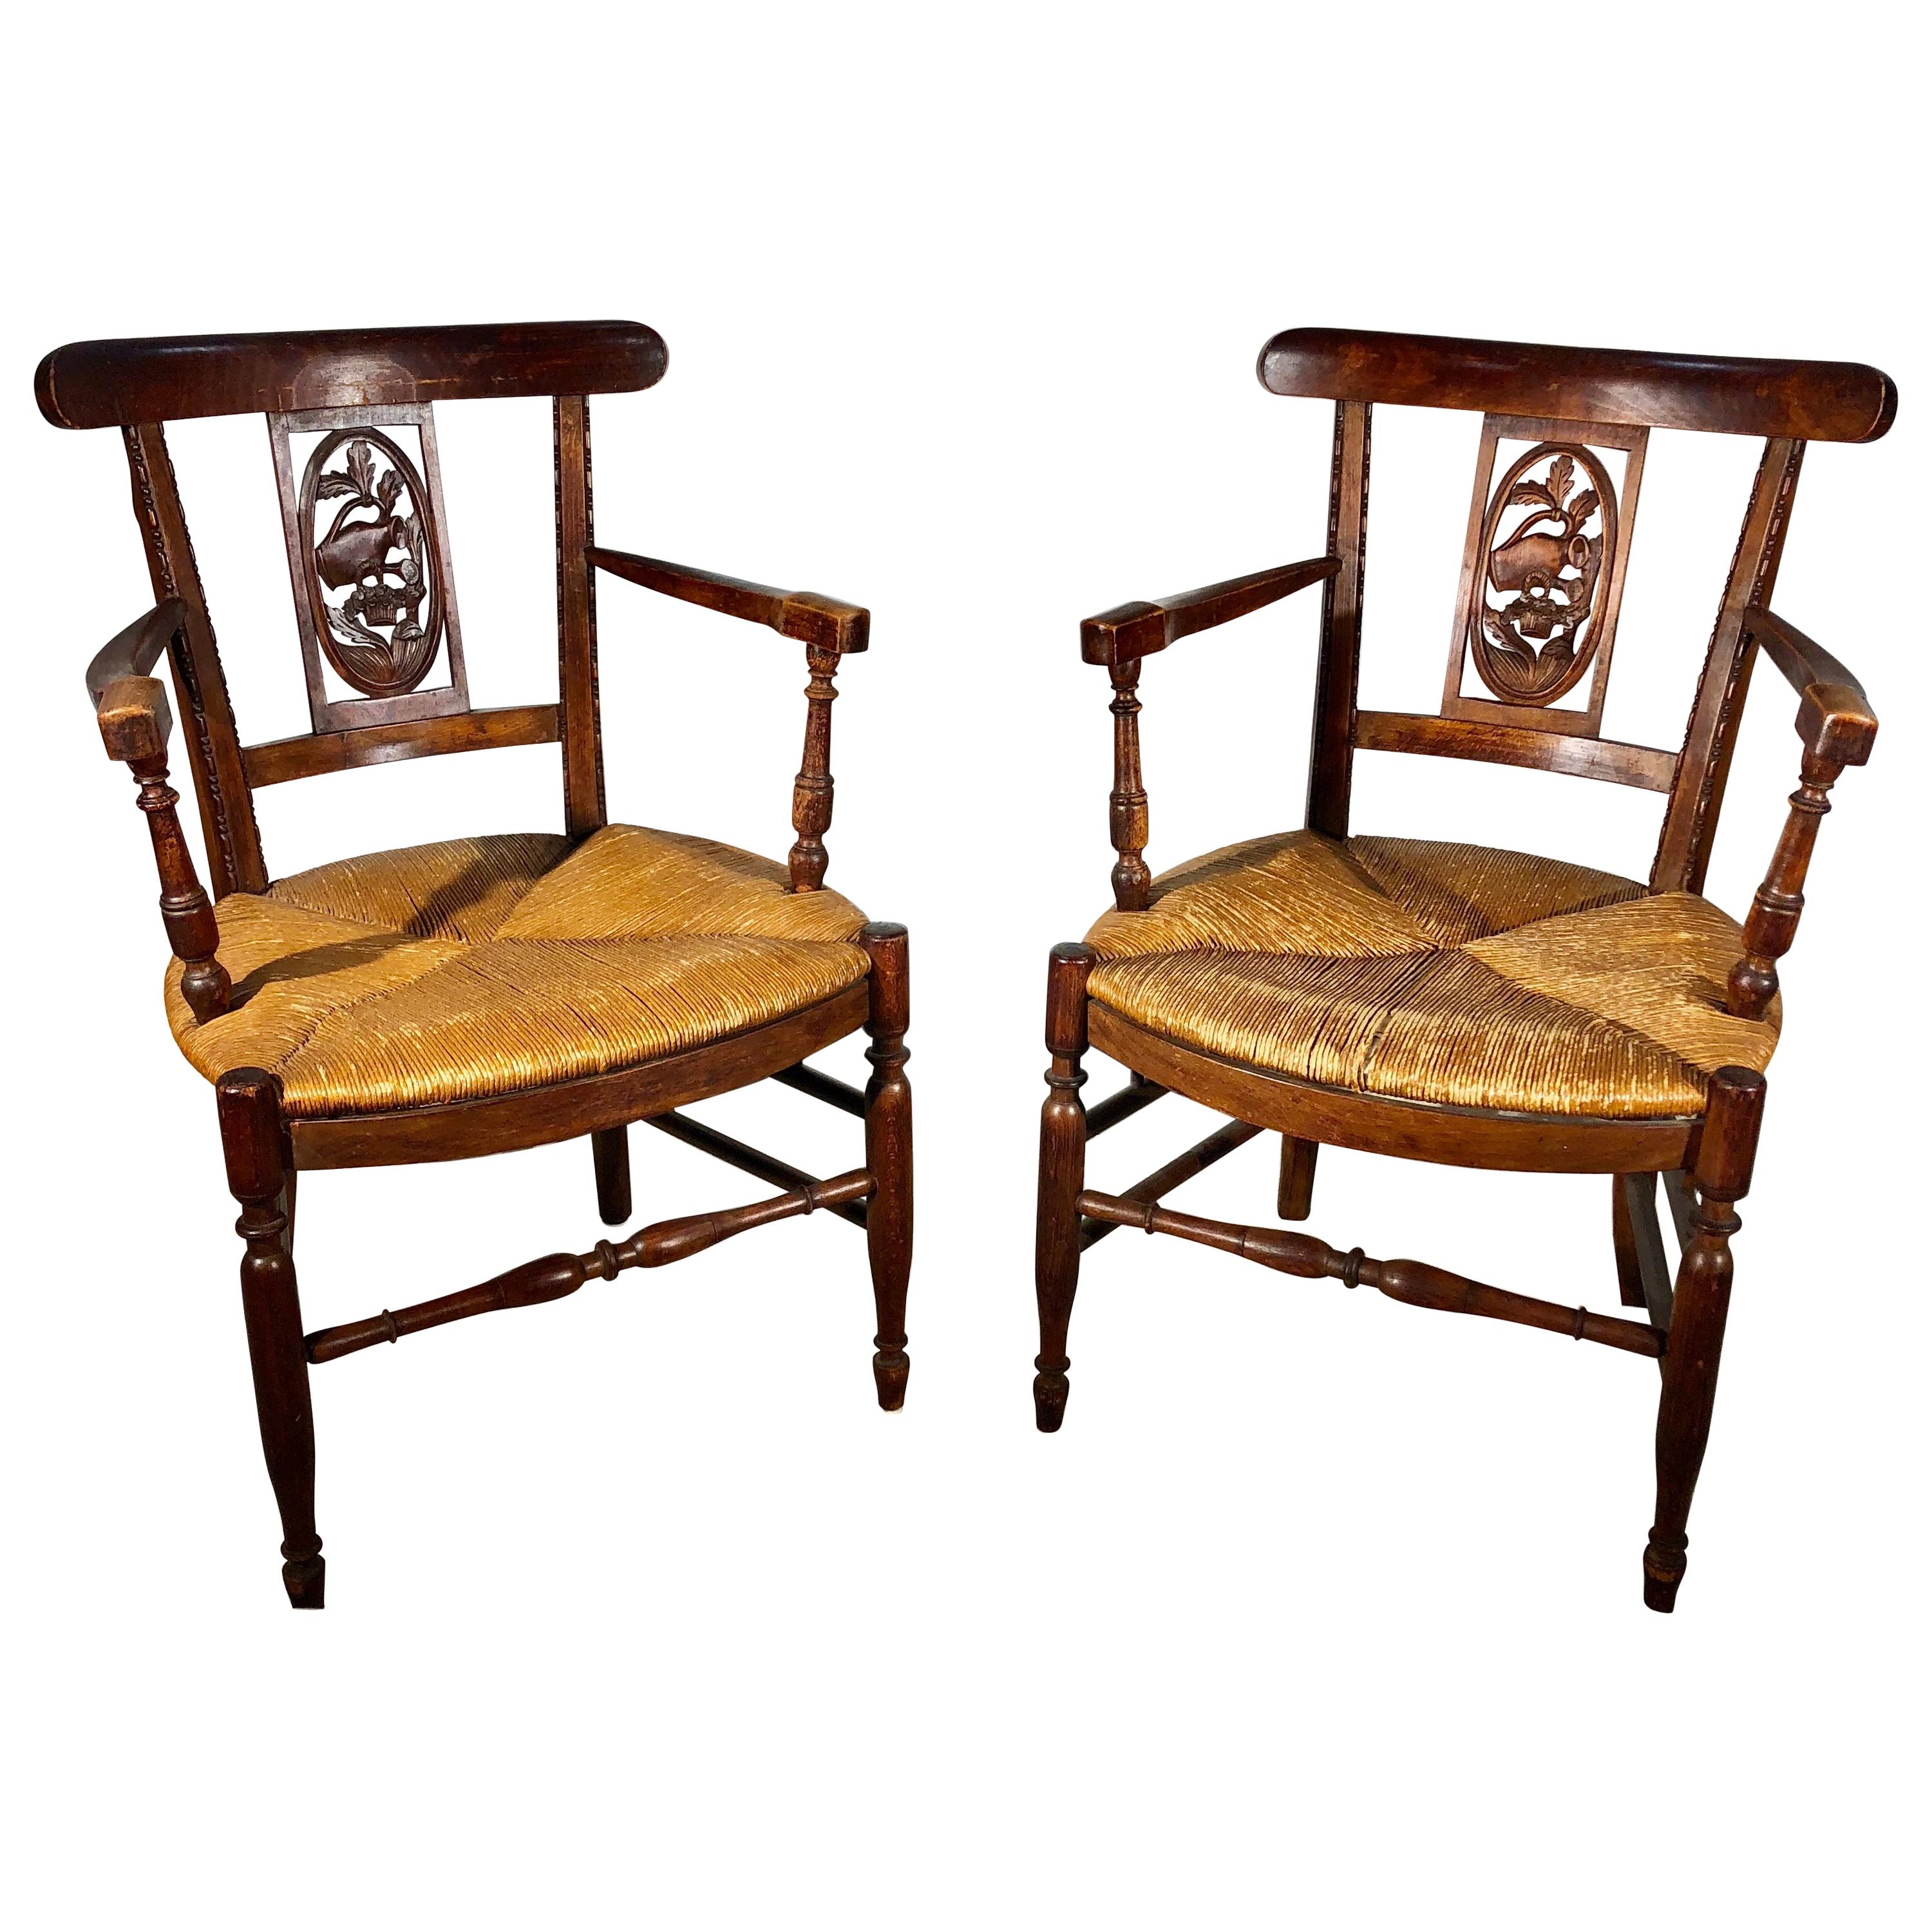 Pair of French Country Armchairs, Garden Theme, 19th Century